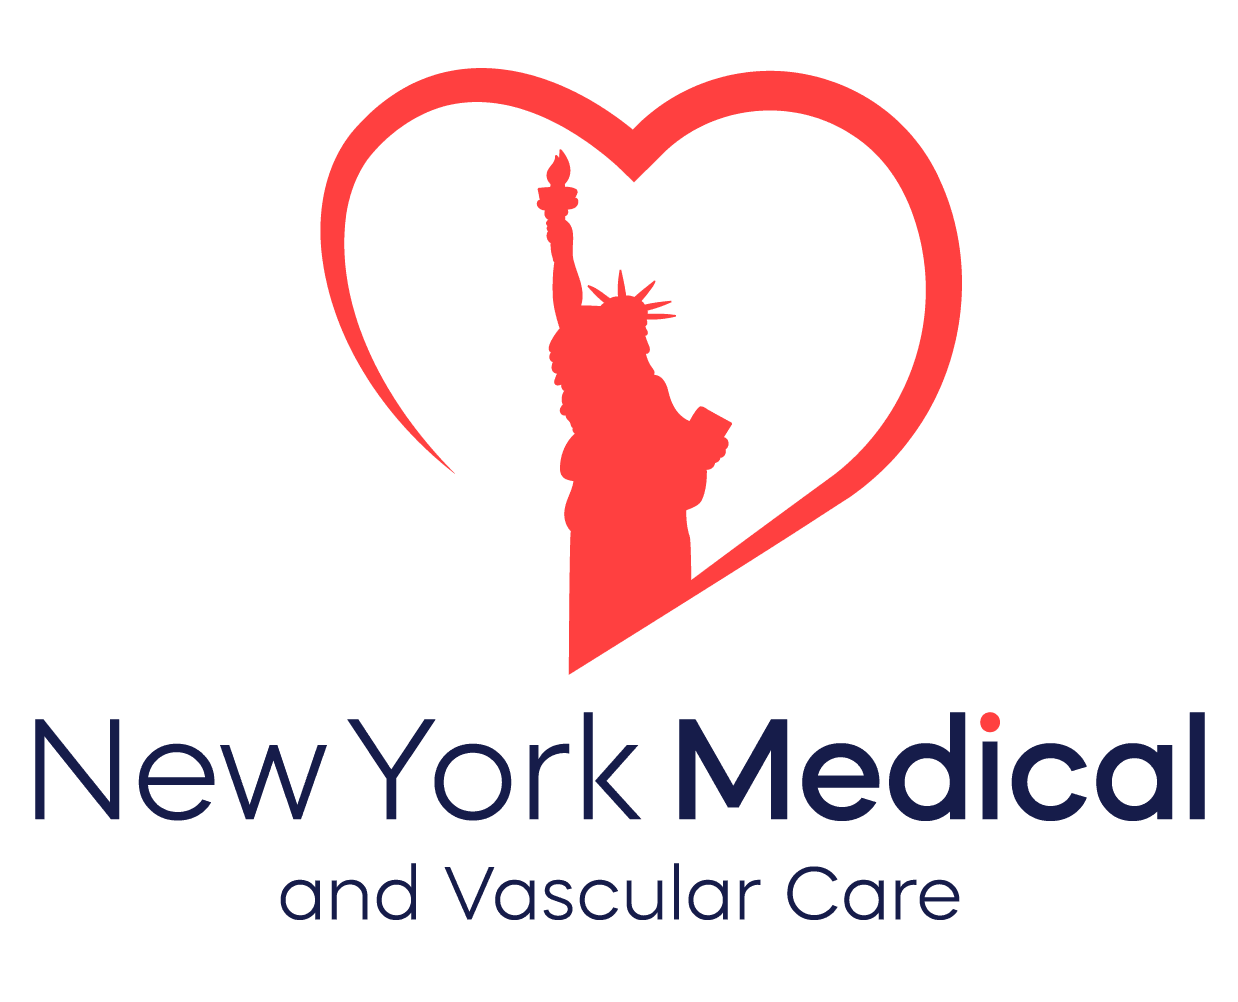 New York Medical and Vascular Care